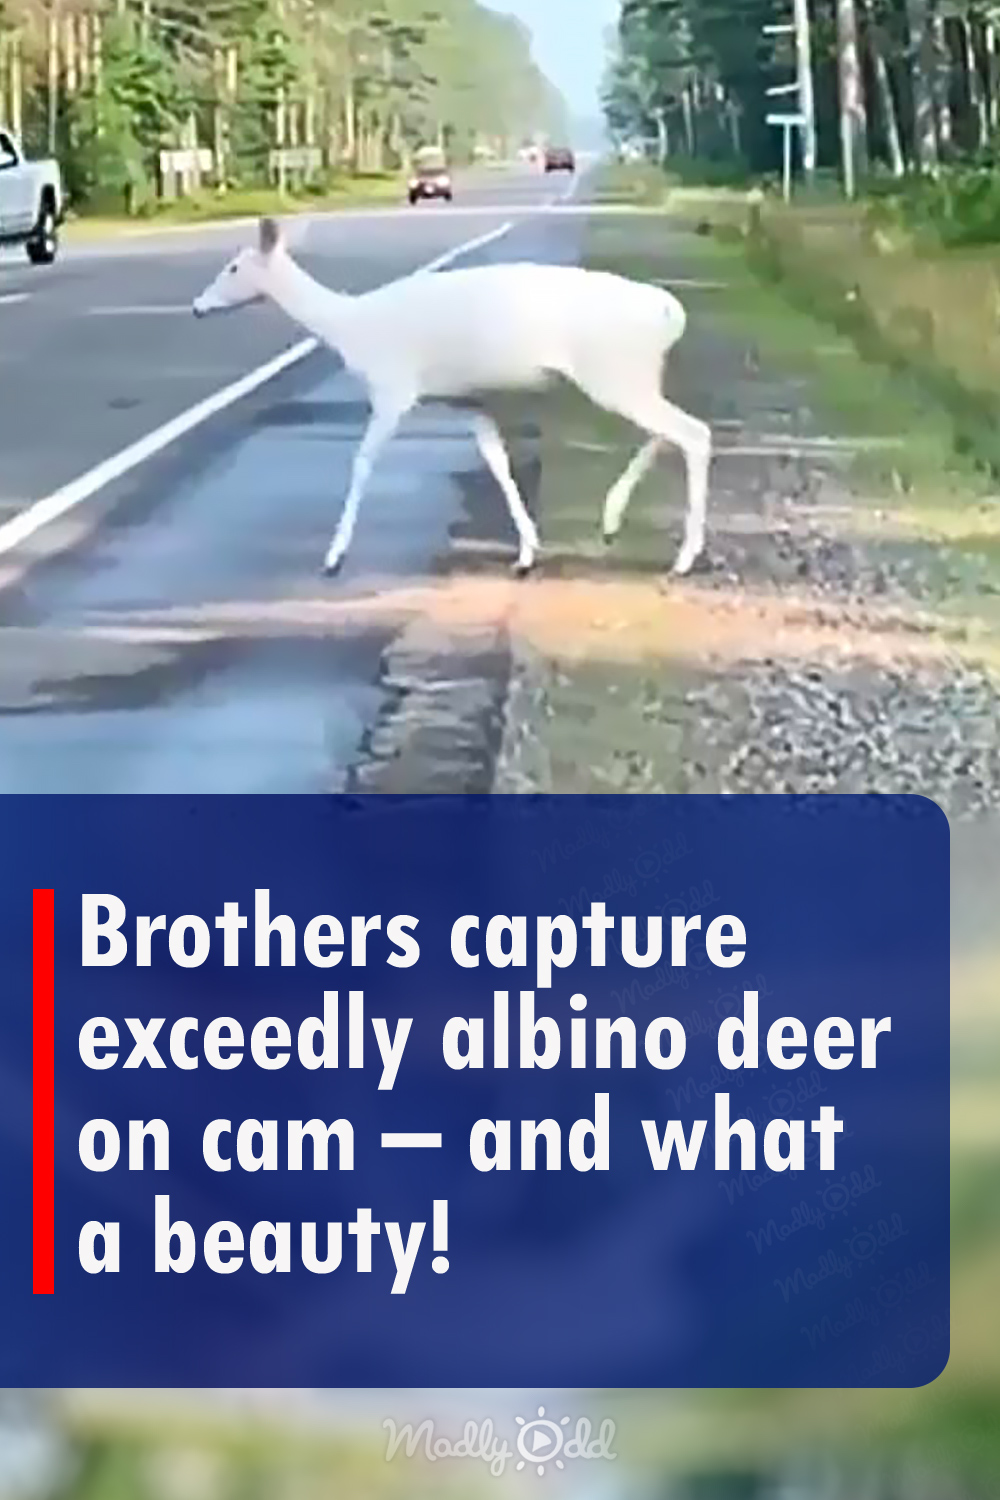 Brothers capture exceedly albino deer on cam – and what a beauty!